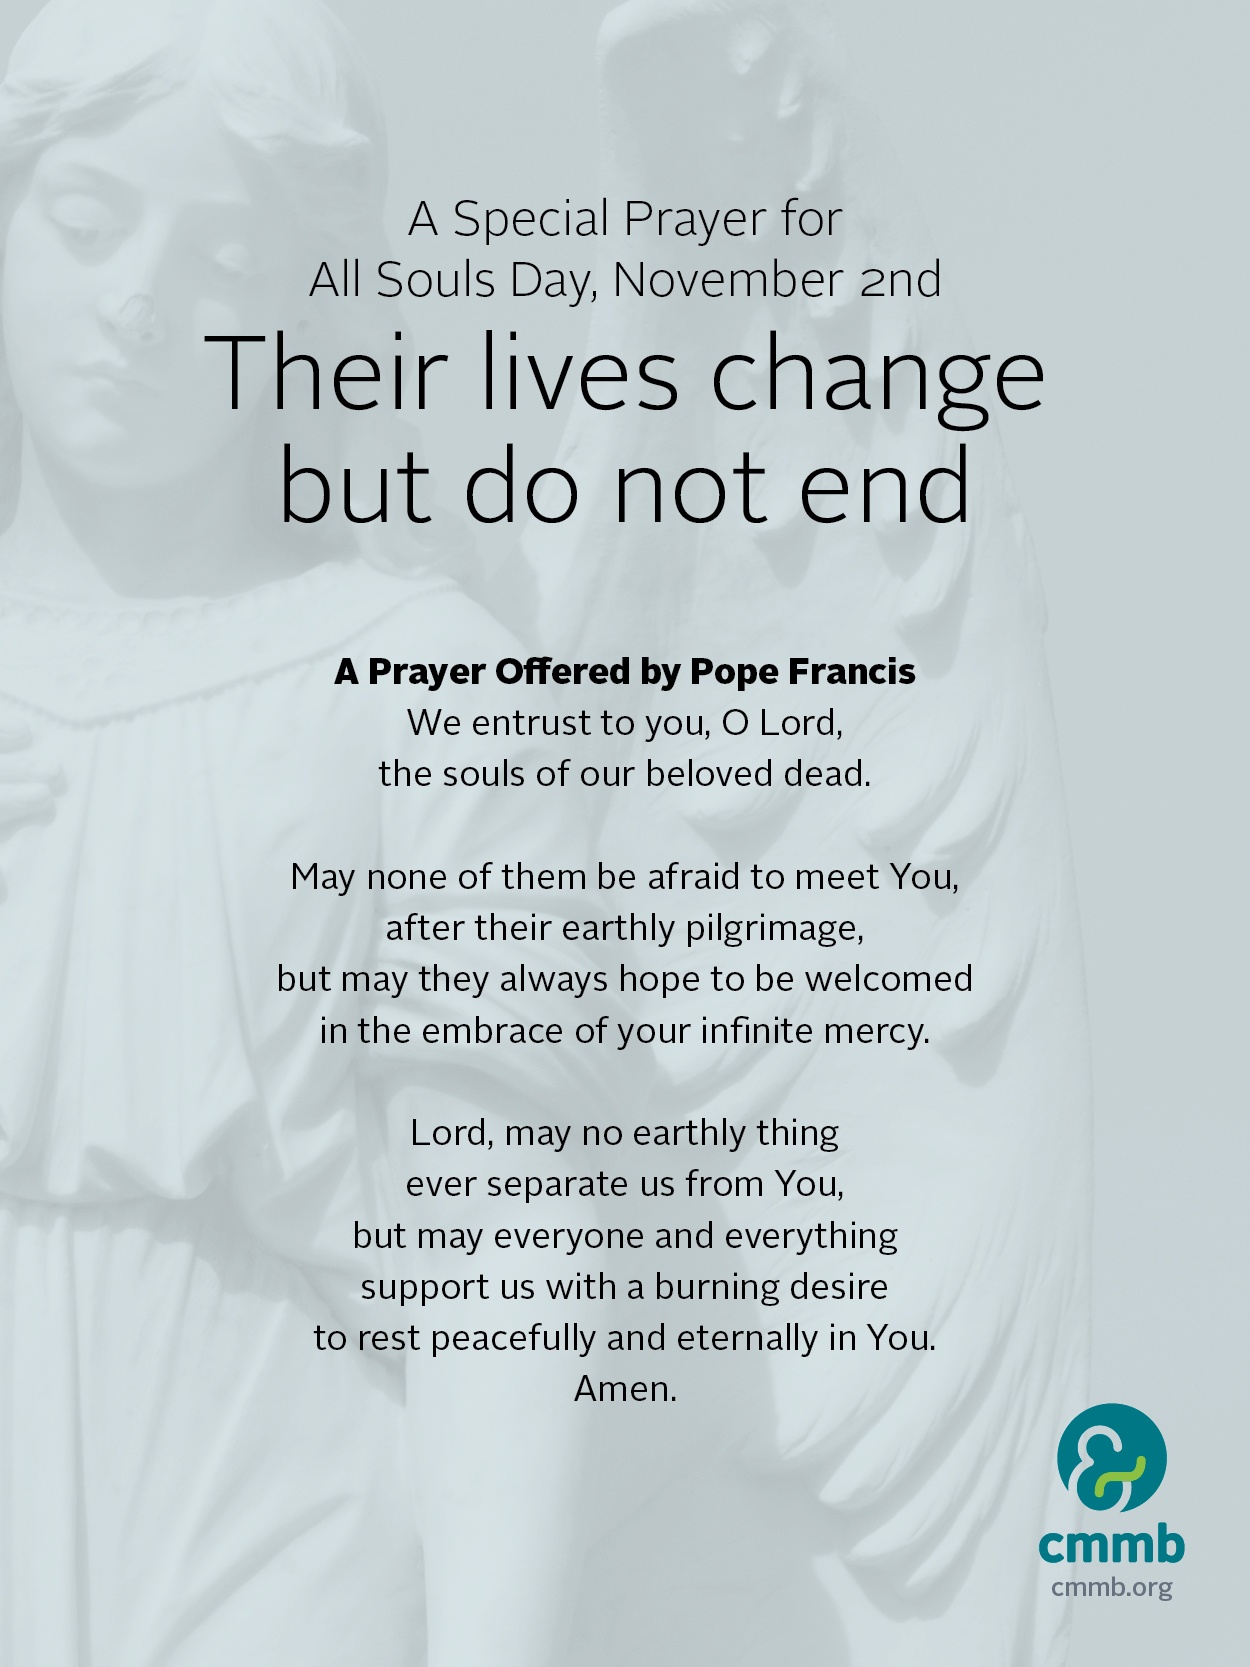 November 2nd is All Souls Day Get Your Free Prayer Card CMMB Blog